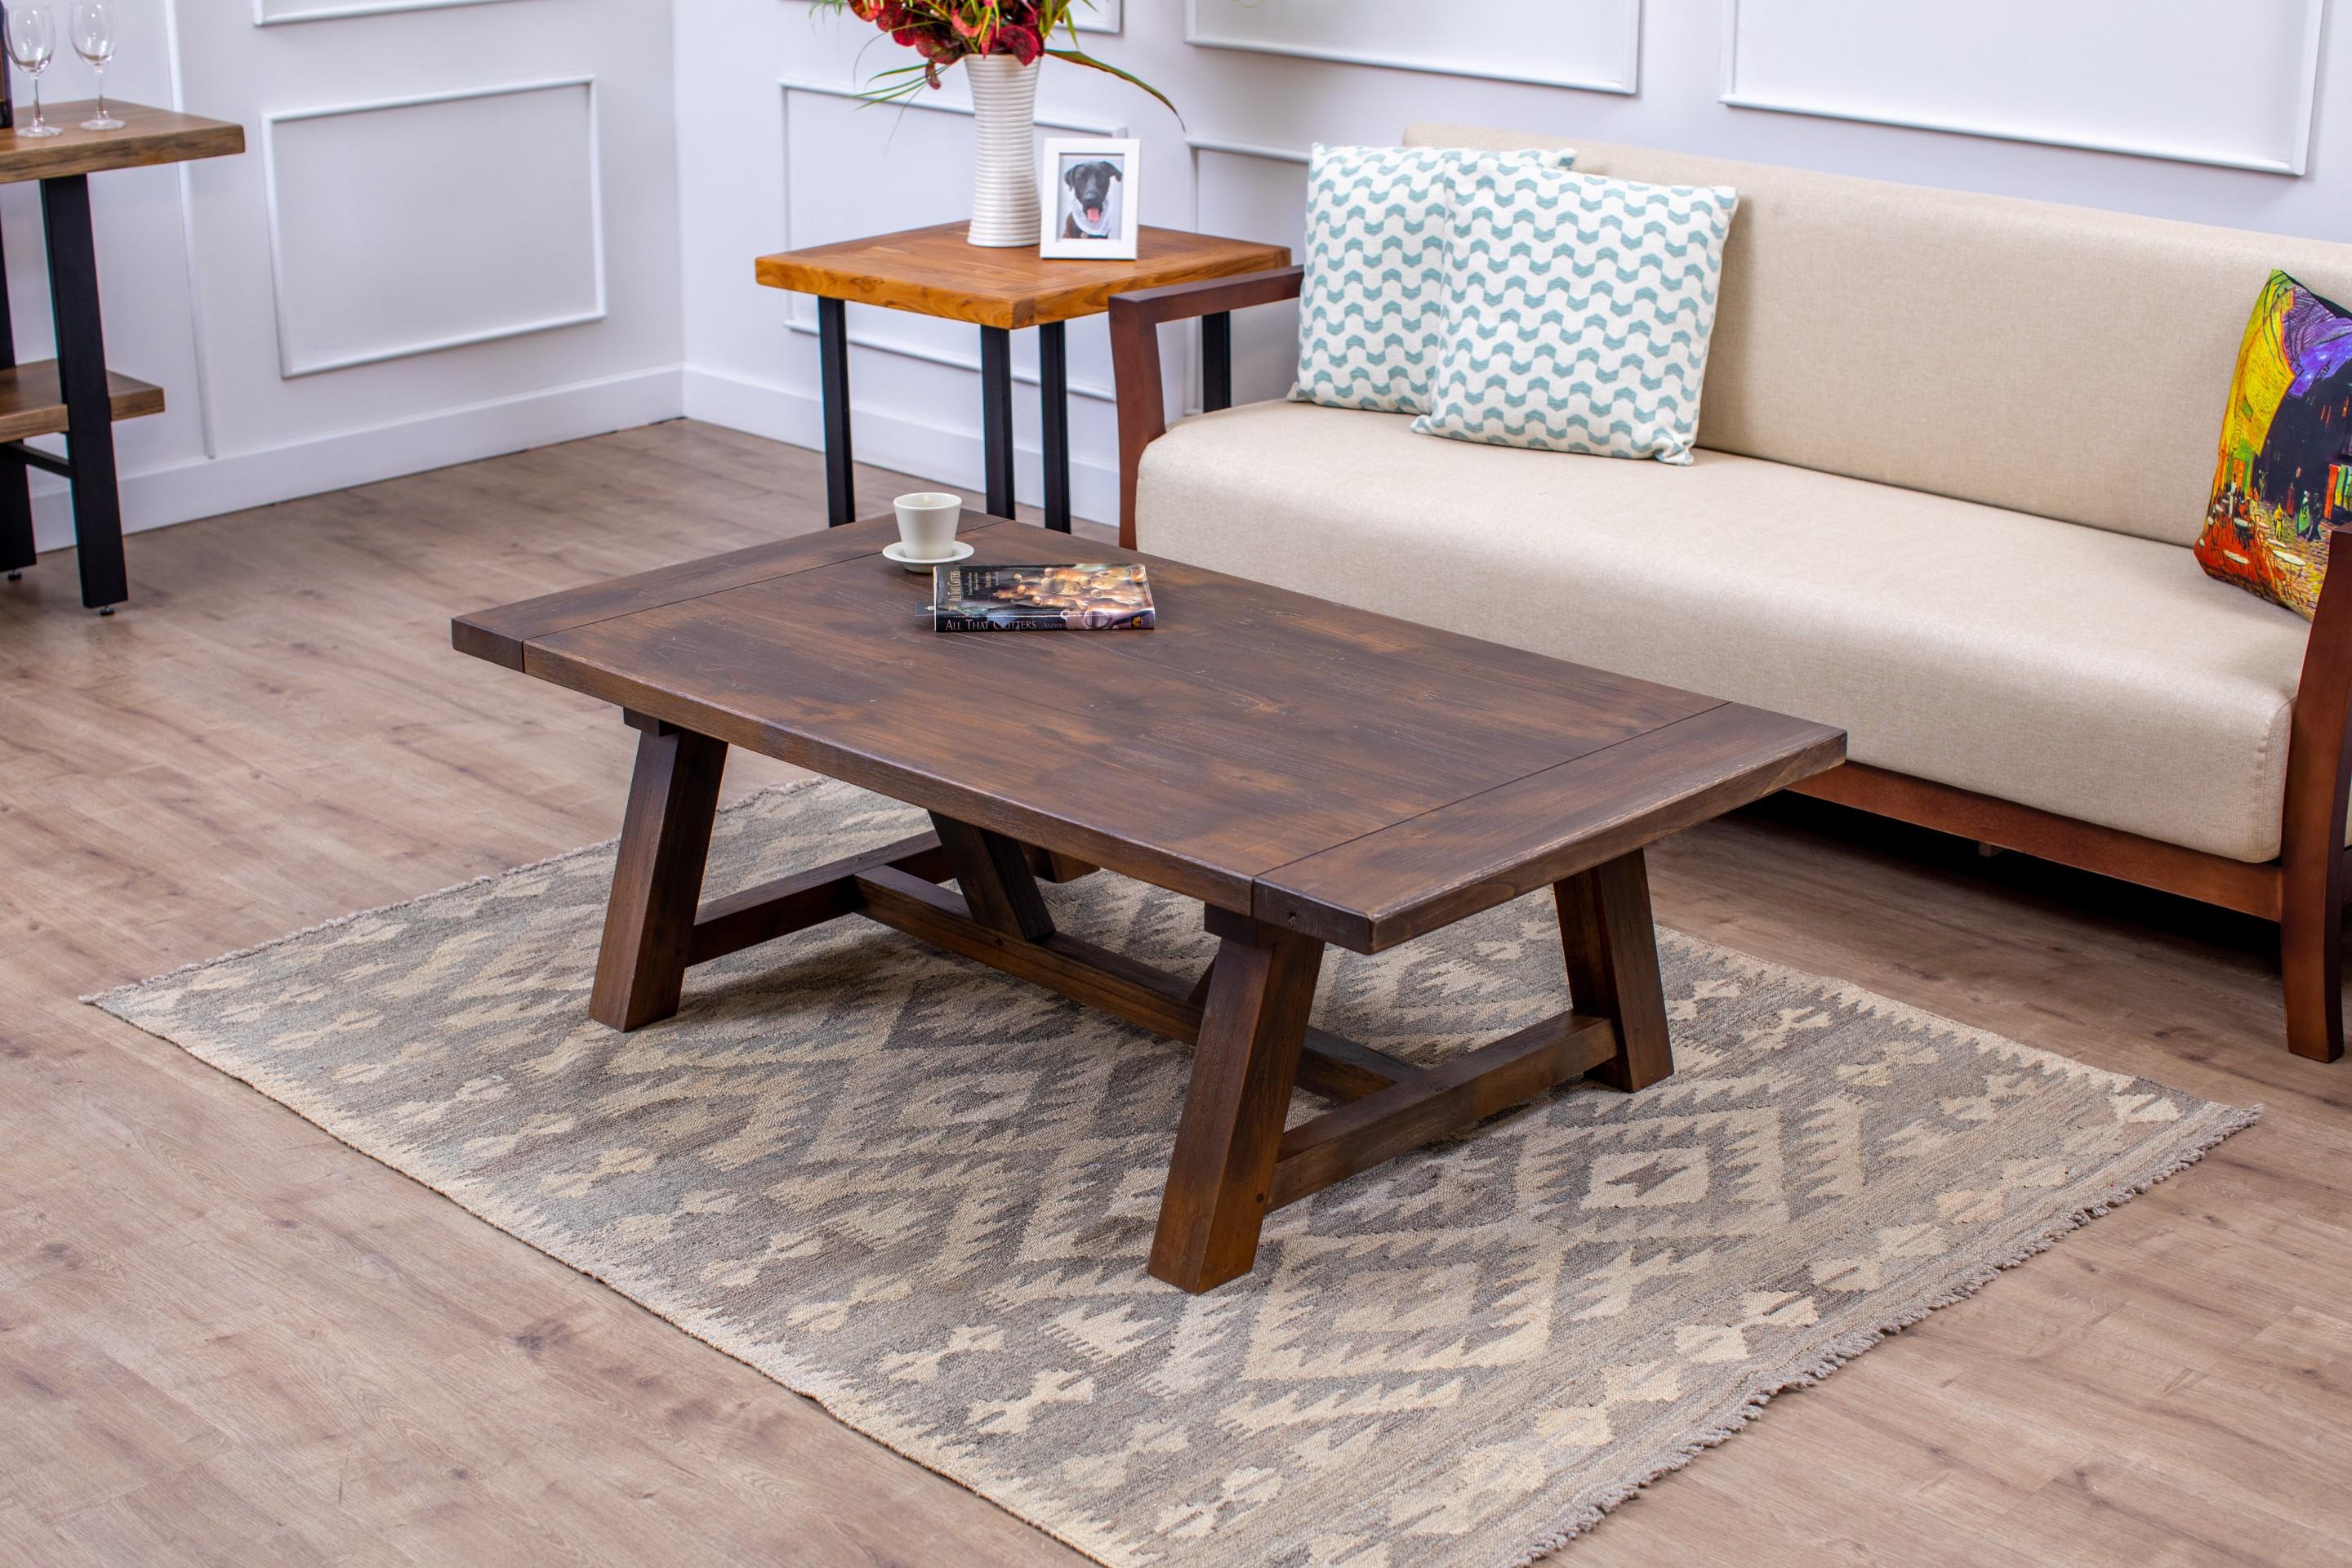 The hand-built rustic teak table emphasizes the elegance of simple design blended with quality craftsmanship, solid hardwoods, and a clean leg design. Its rustic, yet sophisticated appeal makes it an easy choice to add style and comfort to your